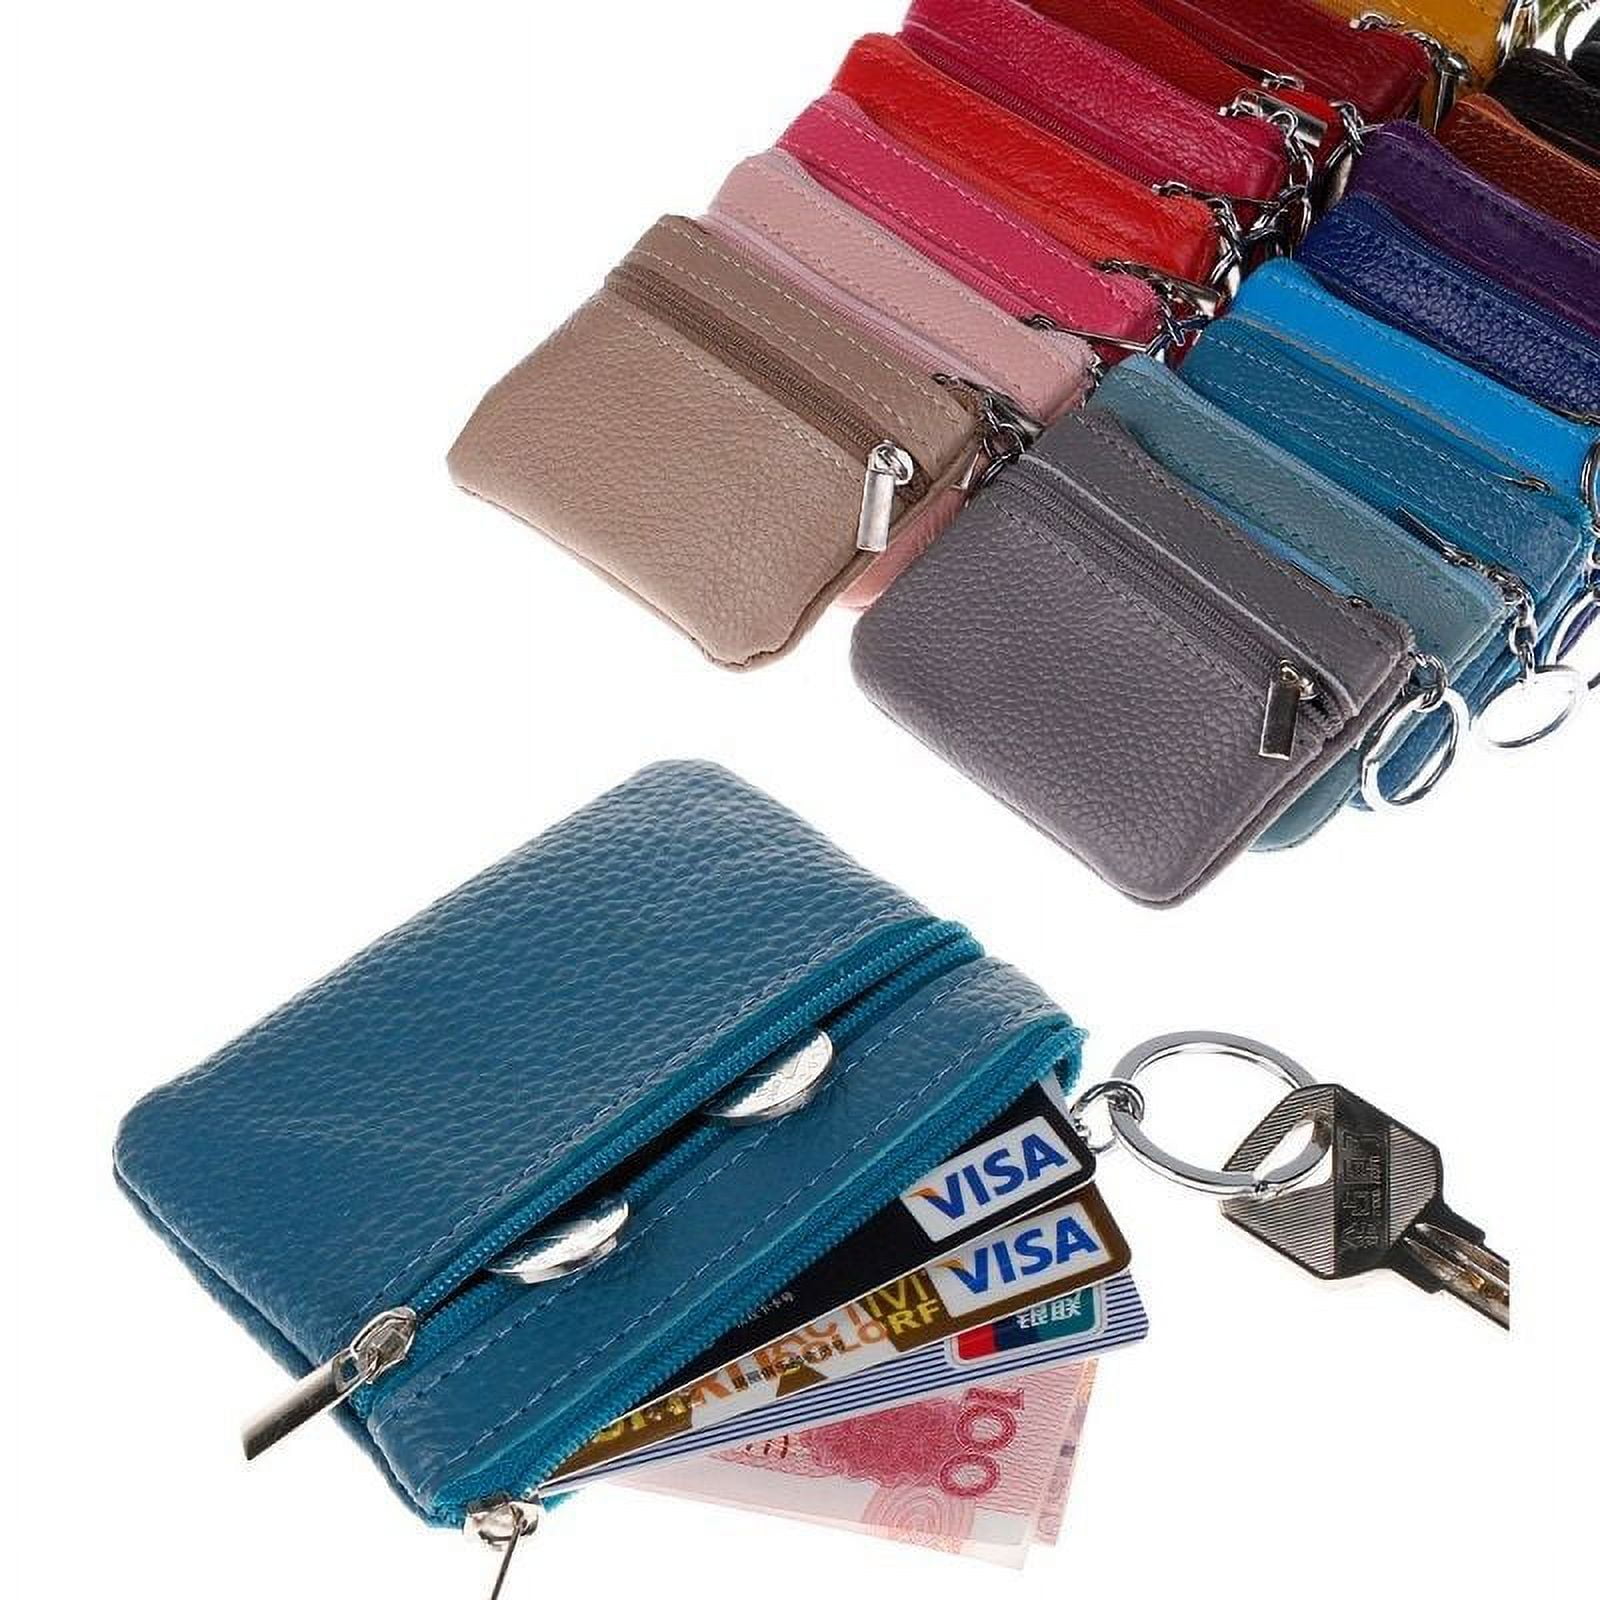 Real Leather Orange Box Key Holder For Women Classic Designer Purse With  Coin Pouch And Black Bag Ideal For Everyday Use From Bvvfcf, $14.93 |  DHgate.Com